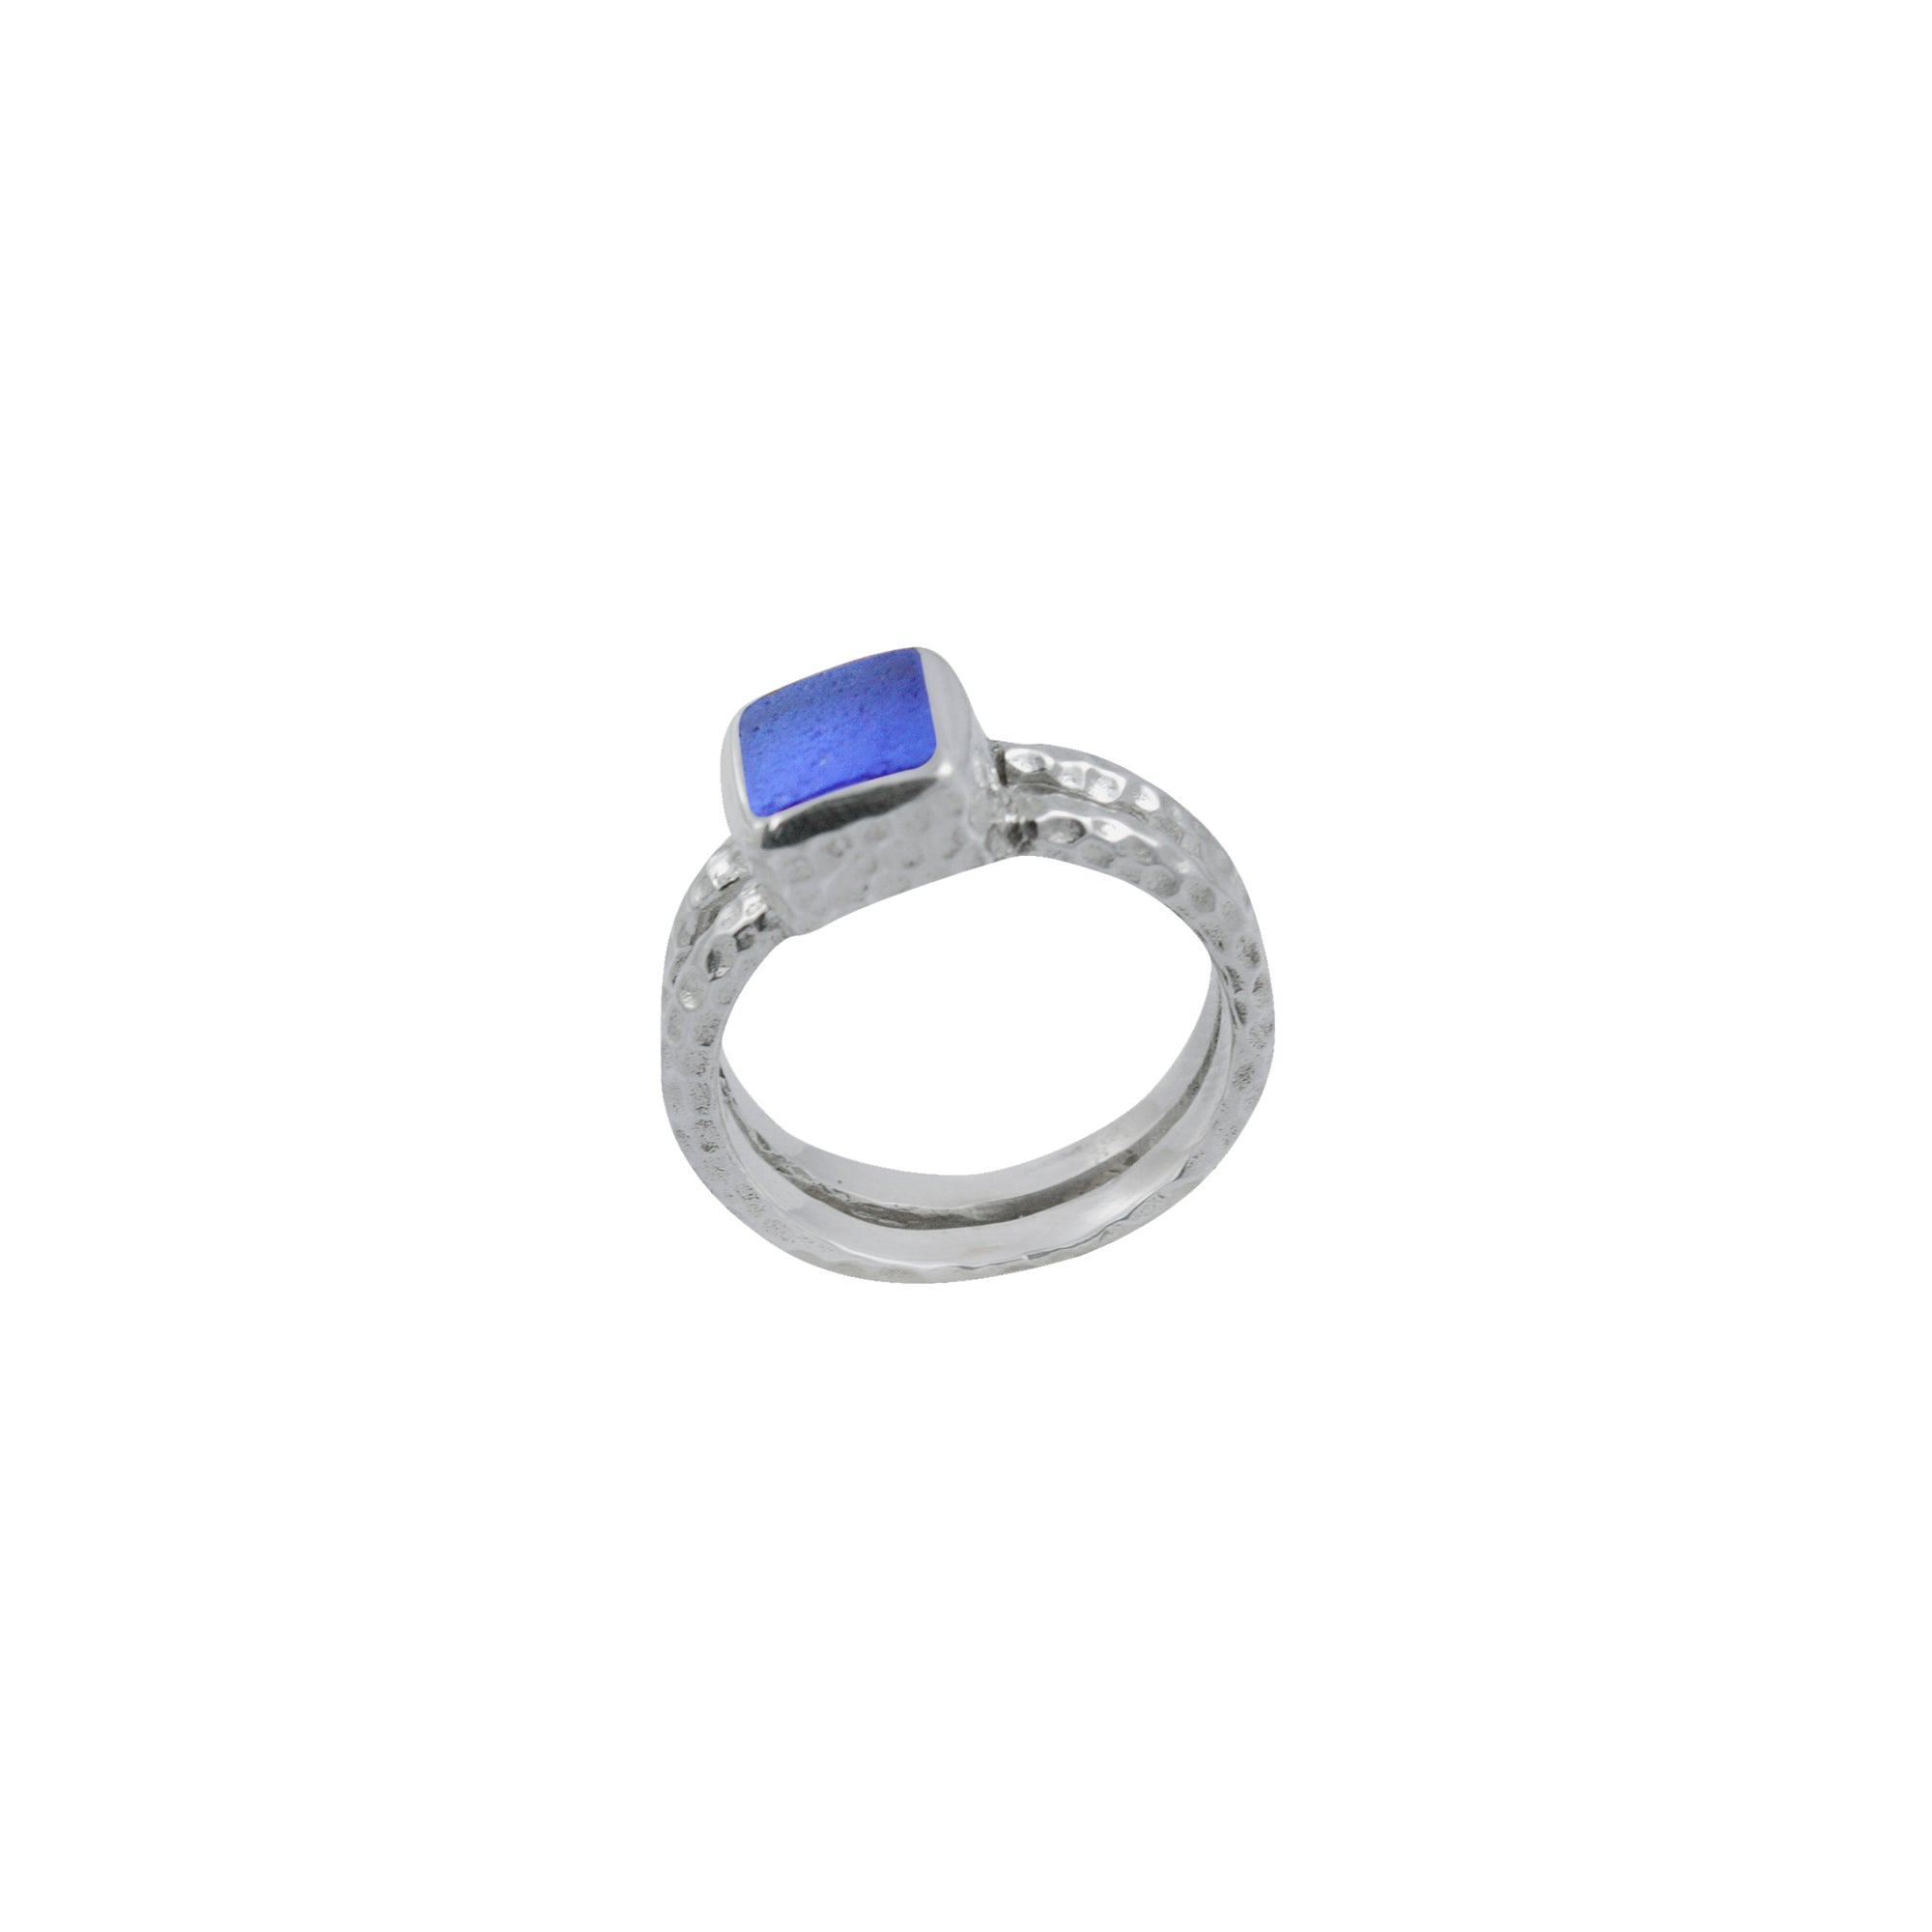 Cobalt Blue Sea Glass Ring with hammered Silver texture